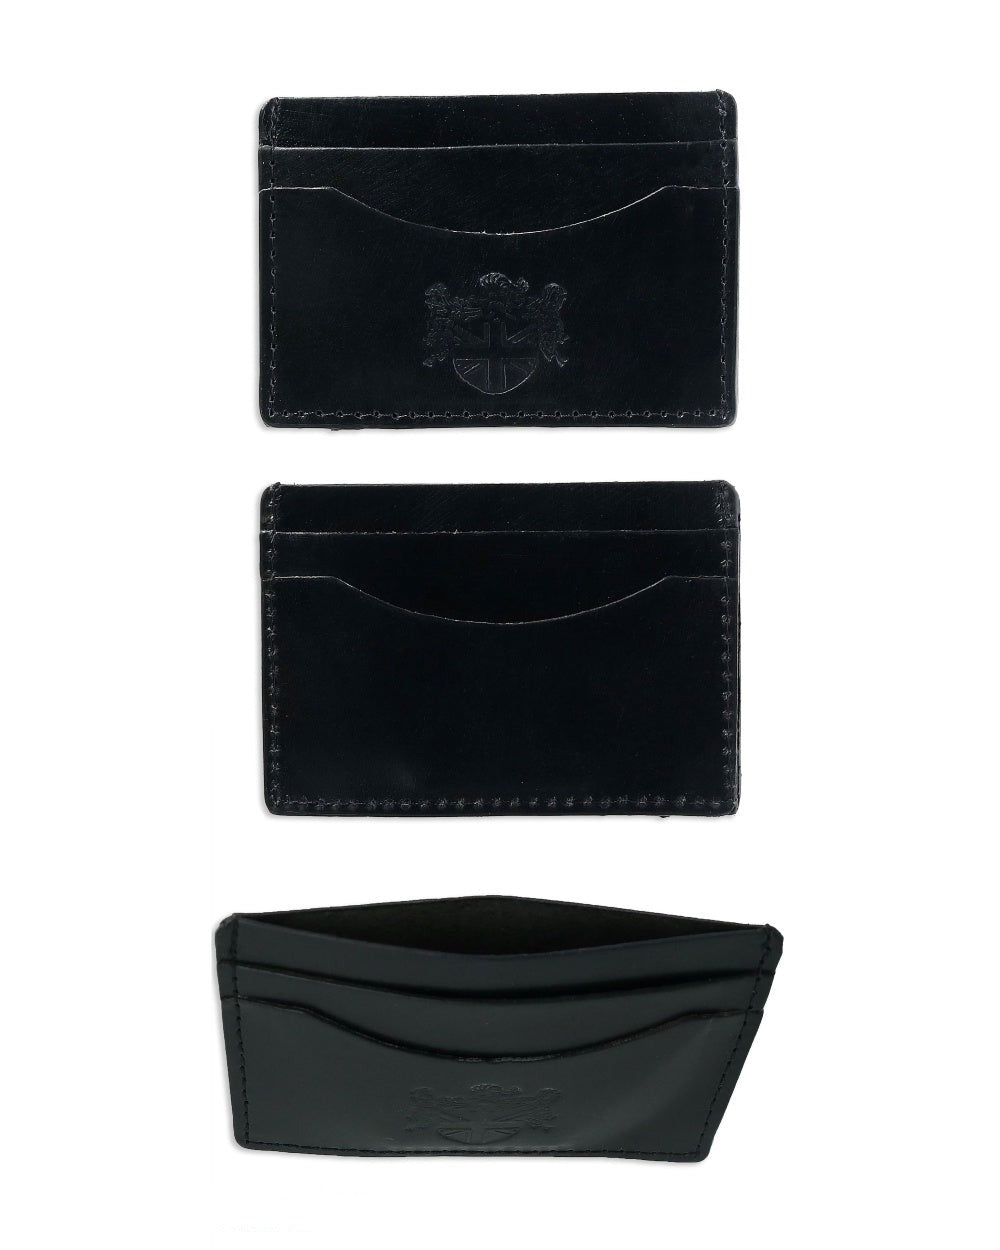 British Bag Co. Glossy Leather Card Holder in Black 